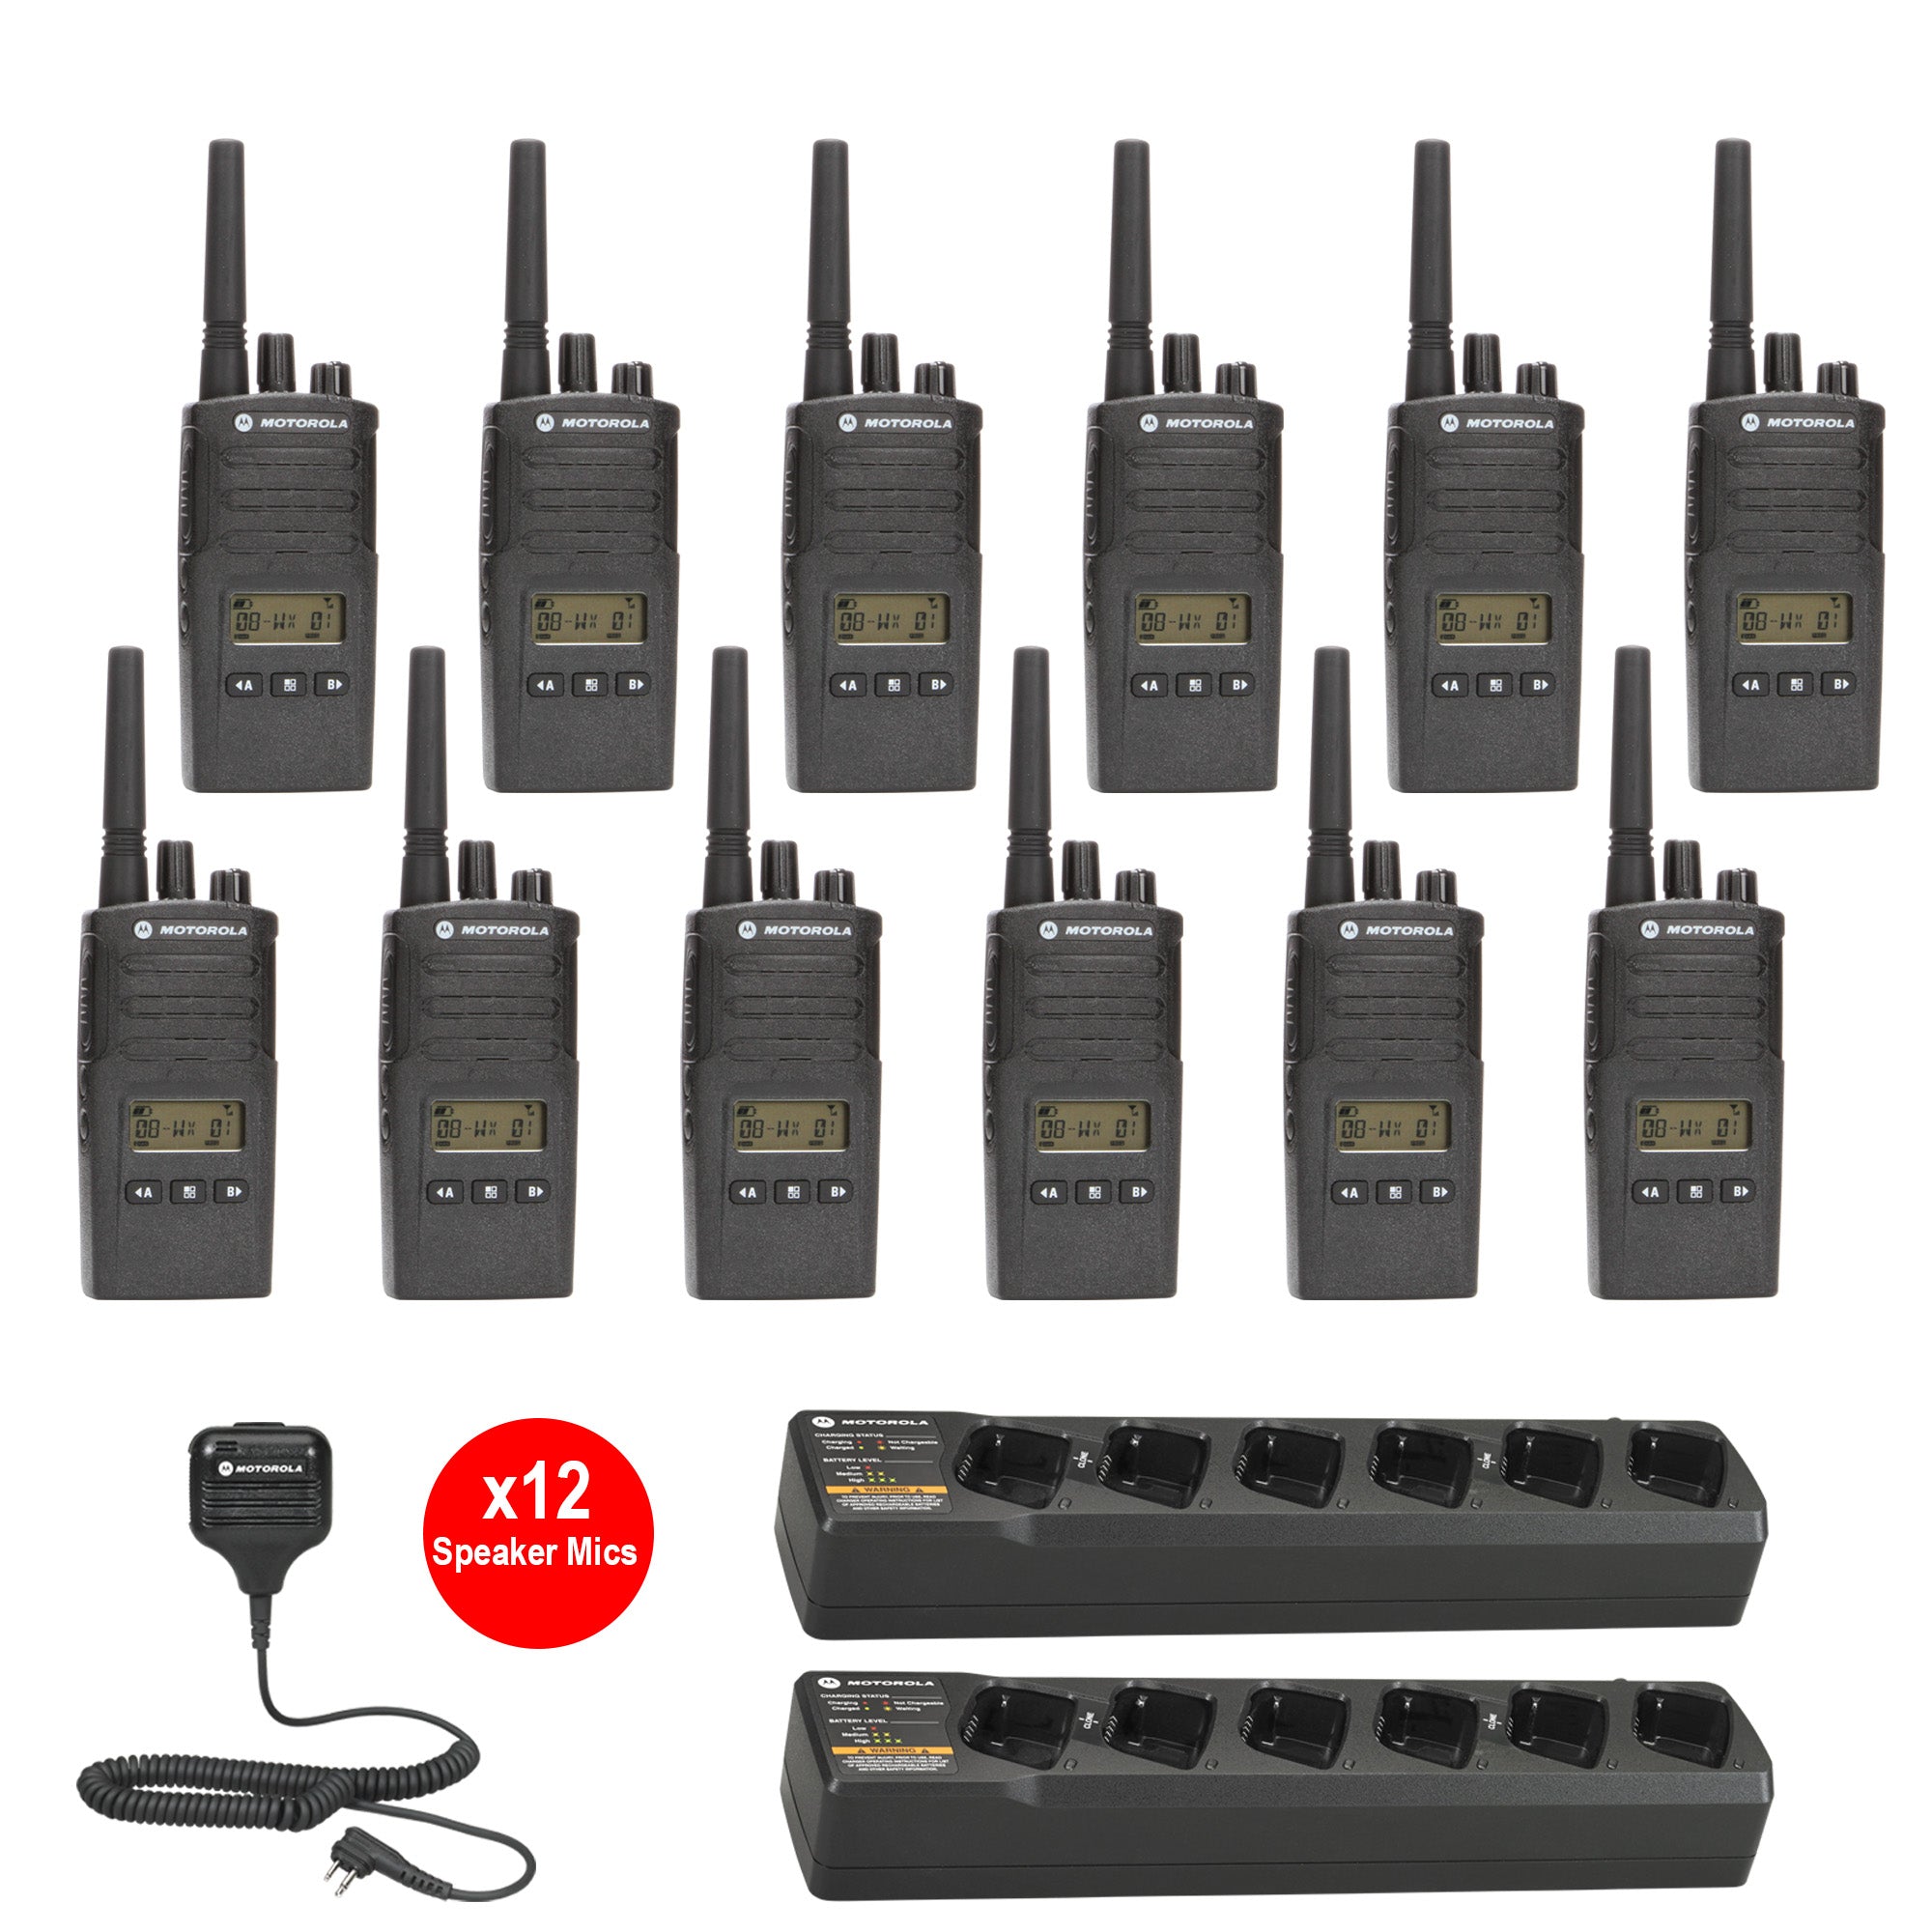 Motorola RMU2080D 12 pack with Multi Unit Charger and Speaker Microphones